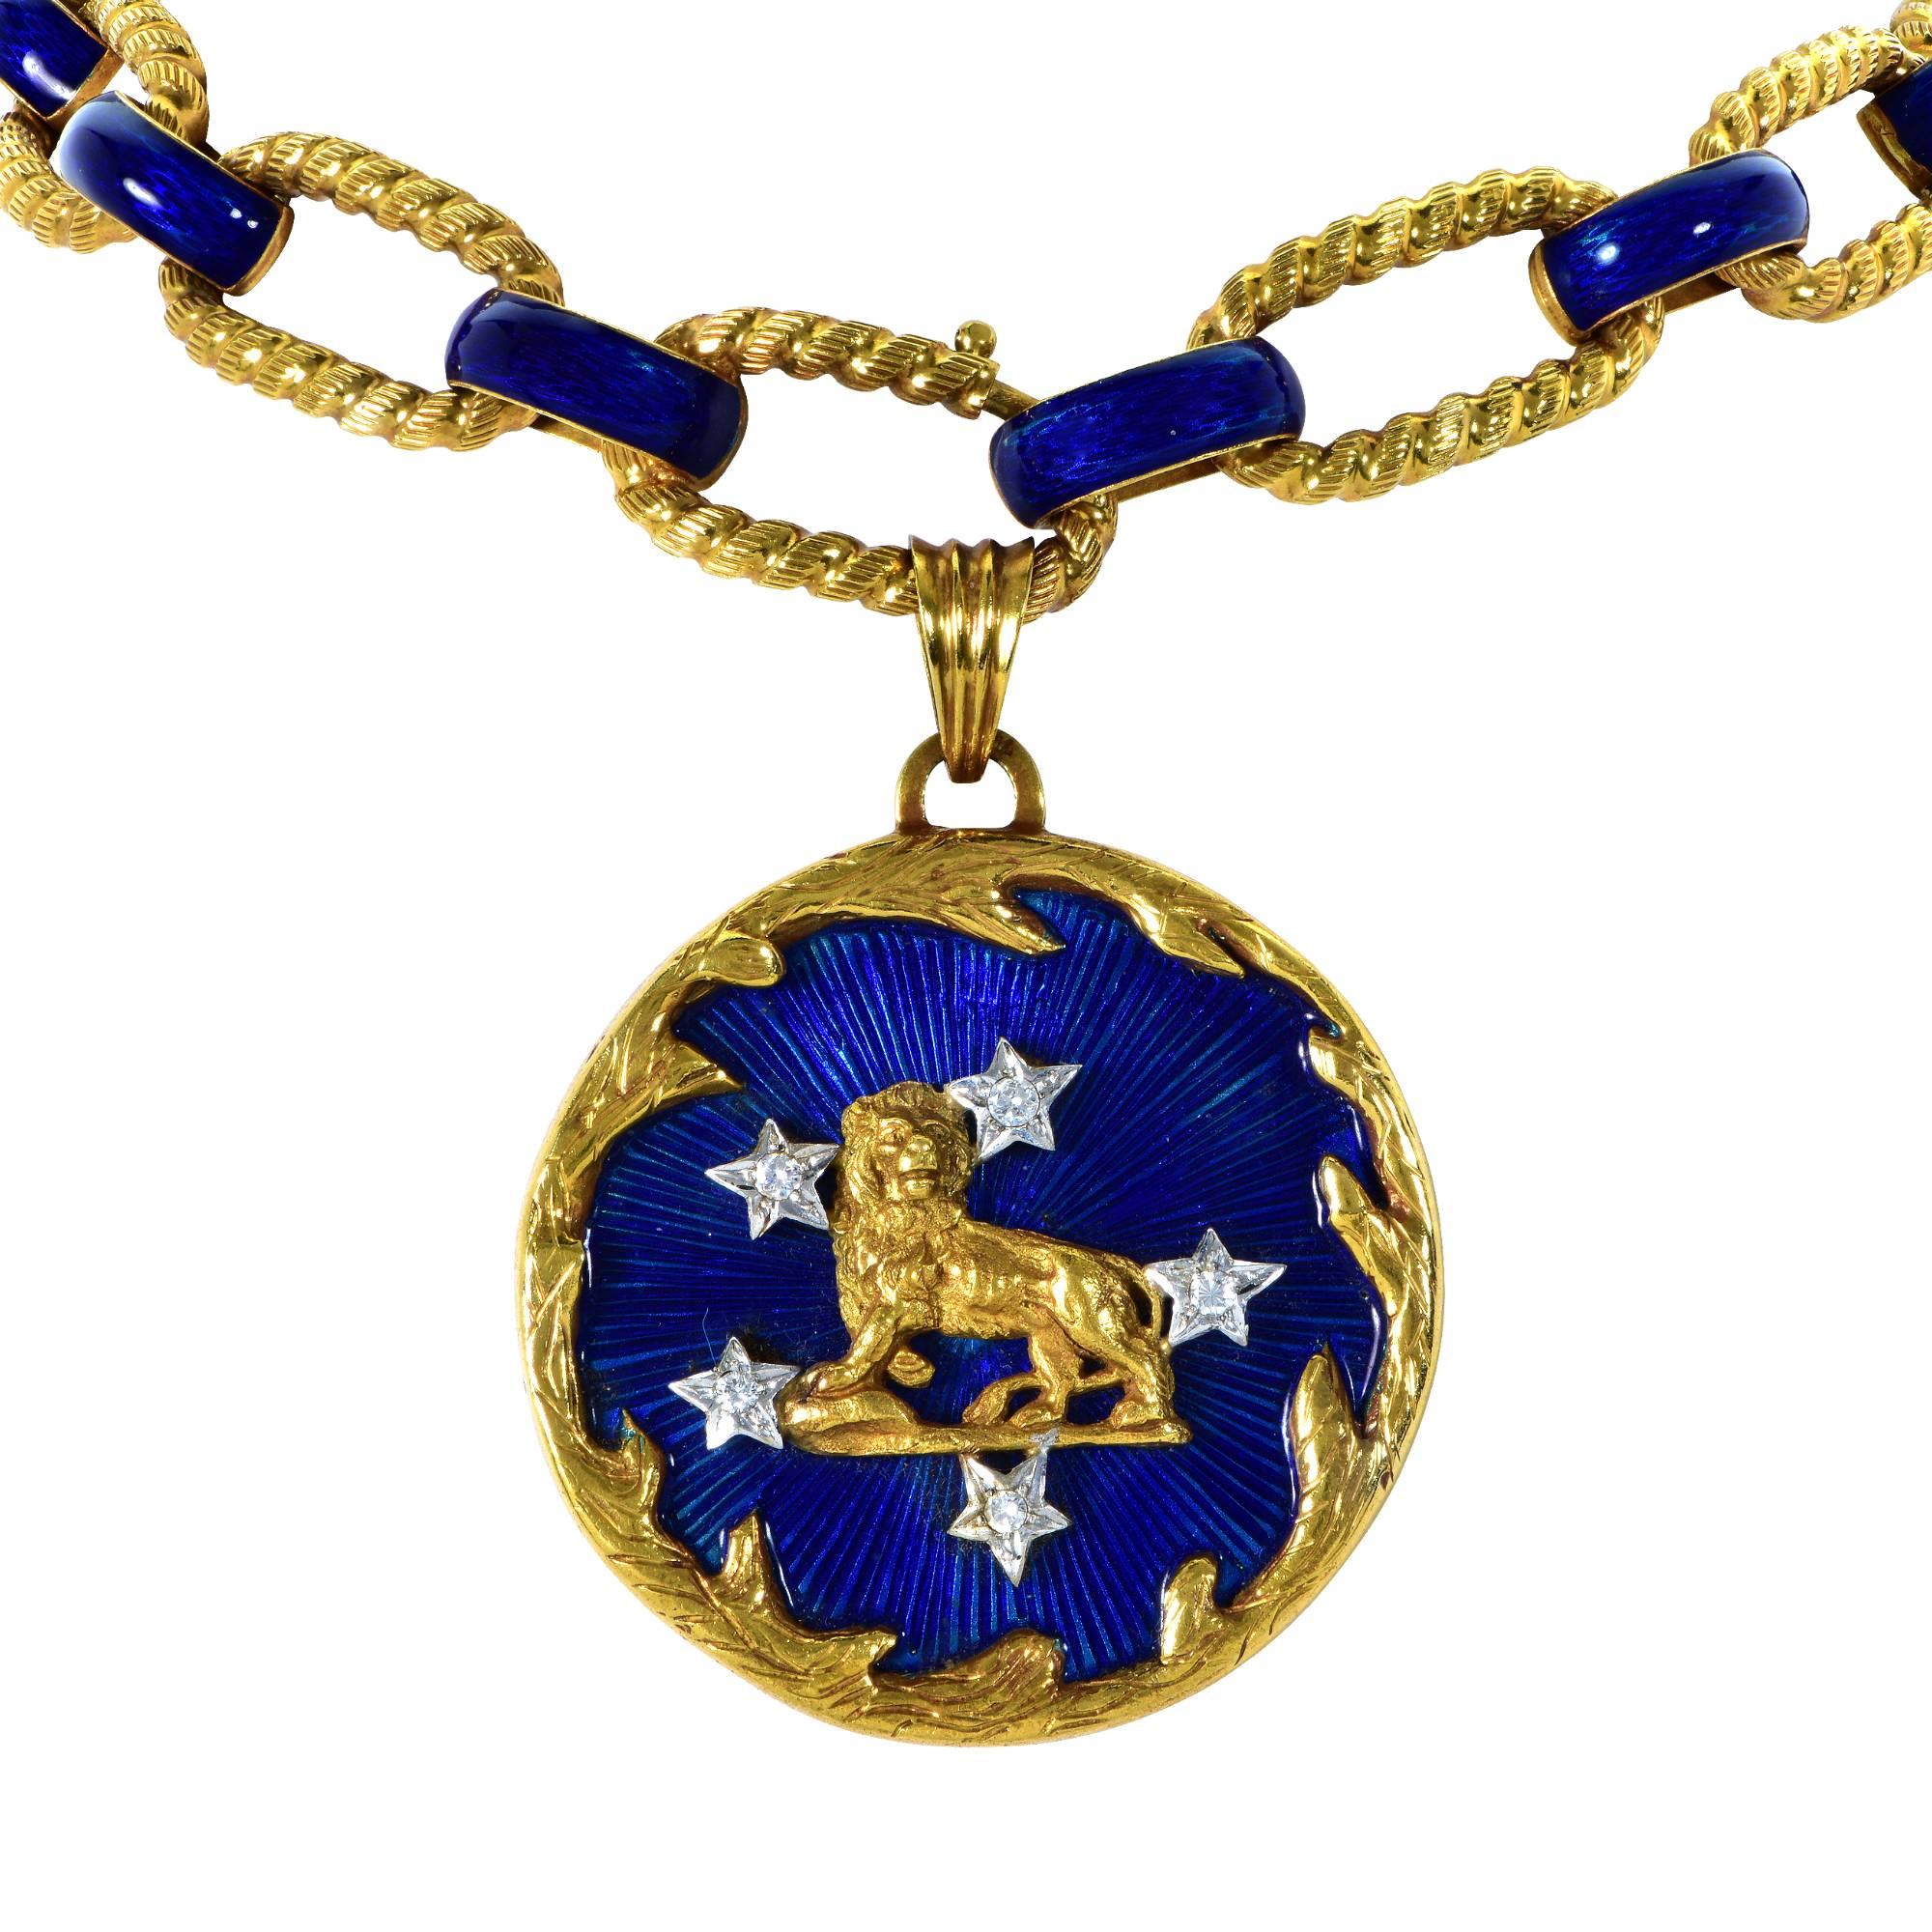 18k yellow gold necklace enhanced with vibrant blue enamel and adorned with an amulet featuring a gold lion. This necklace is transformable in to a necklace and bracelet suite.

The pendant measures 2 inches in diameter and the bracelet measures 8